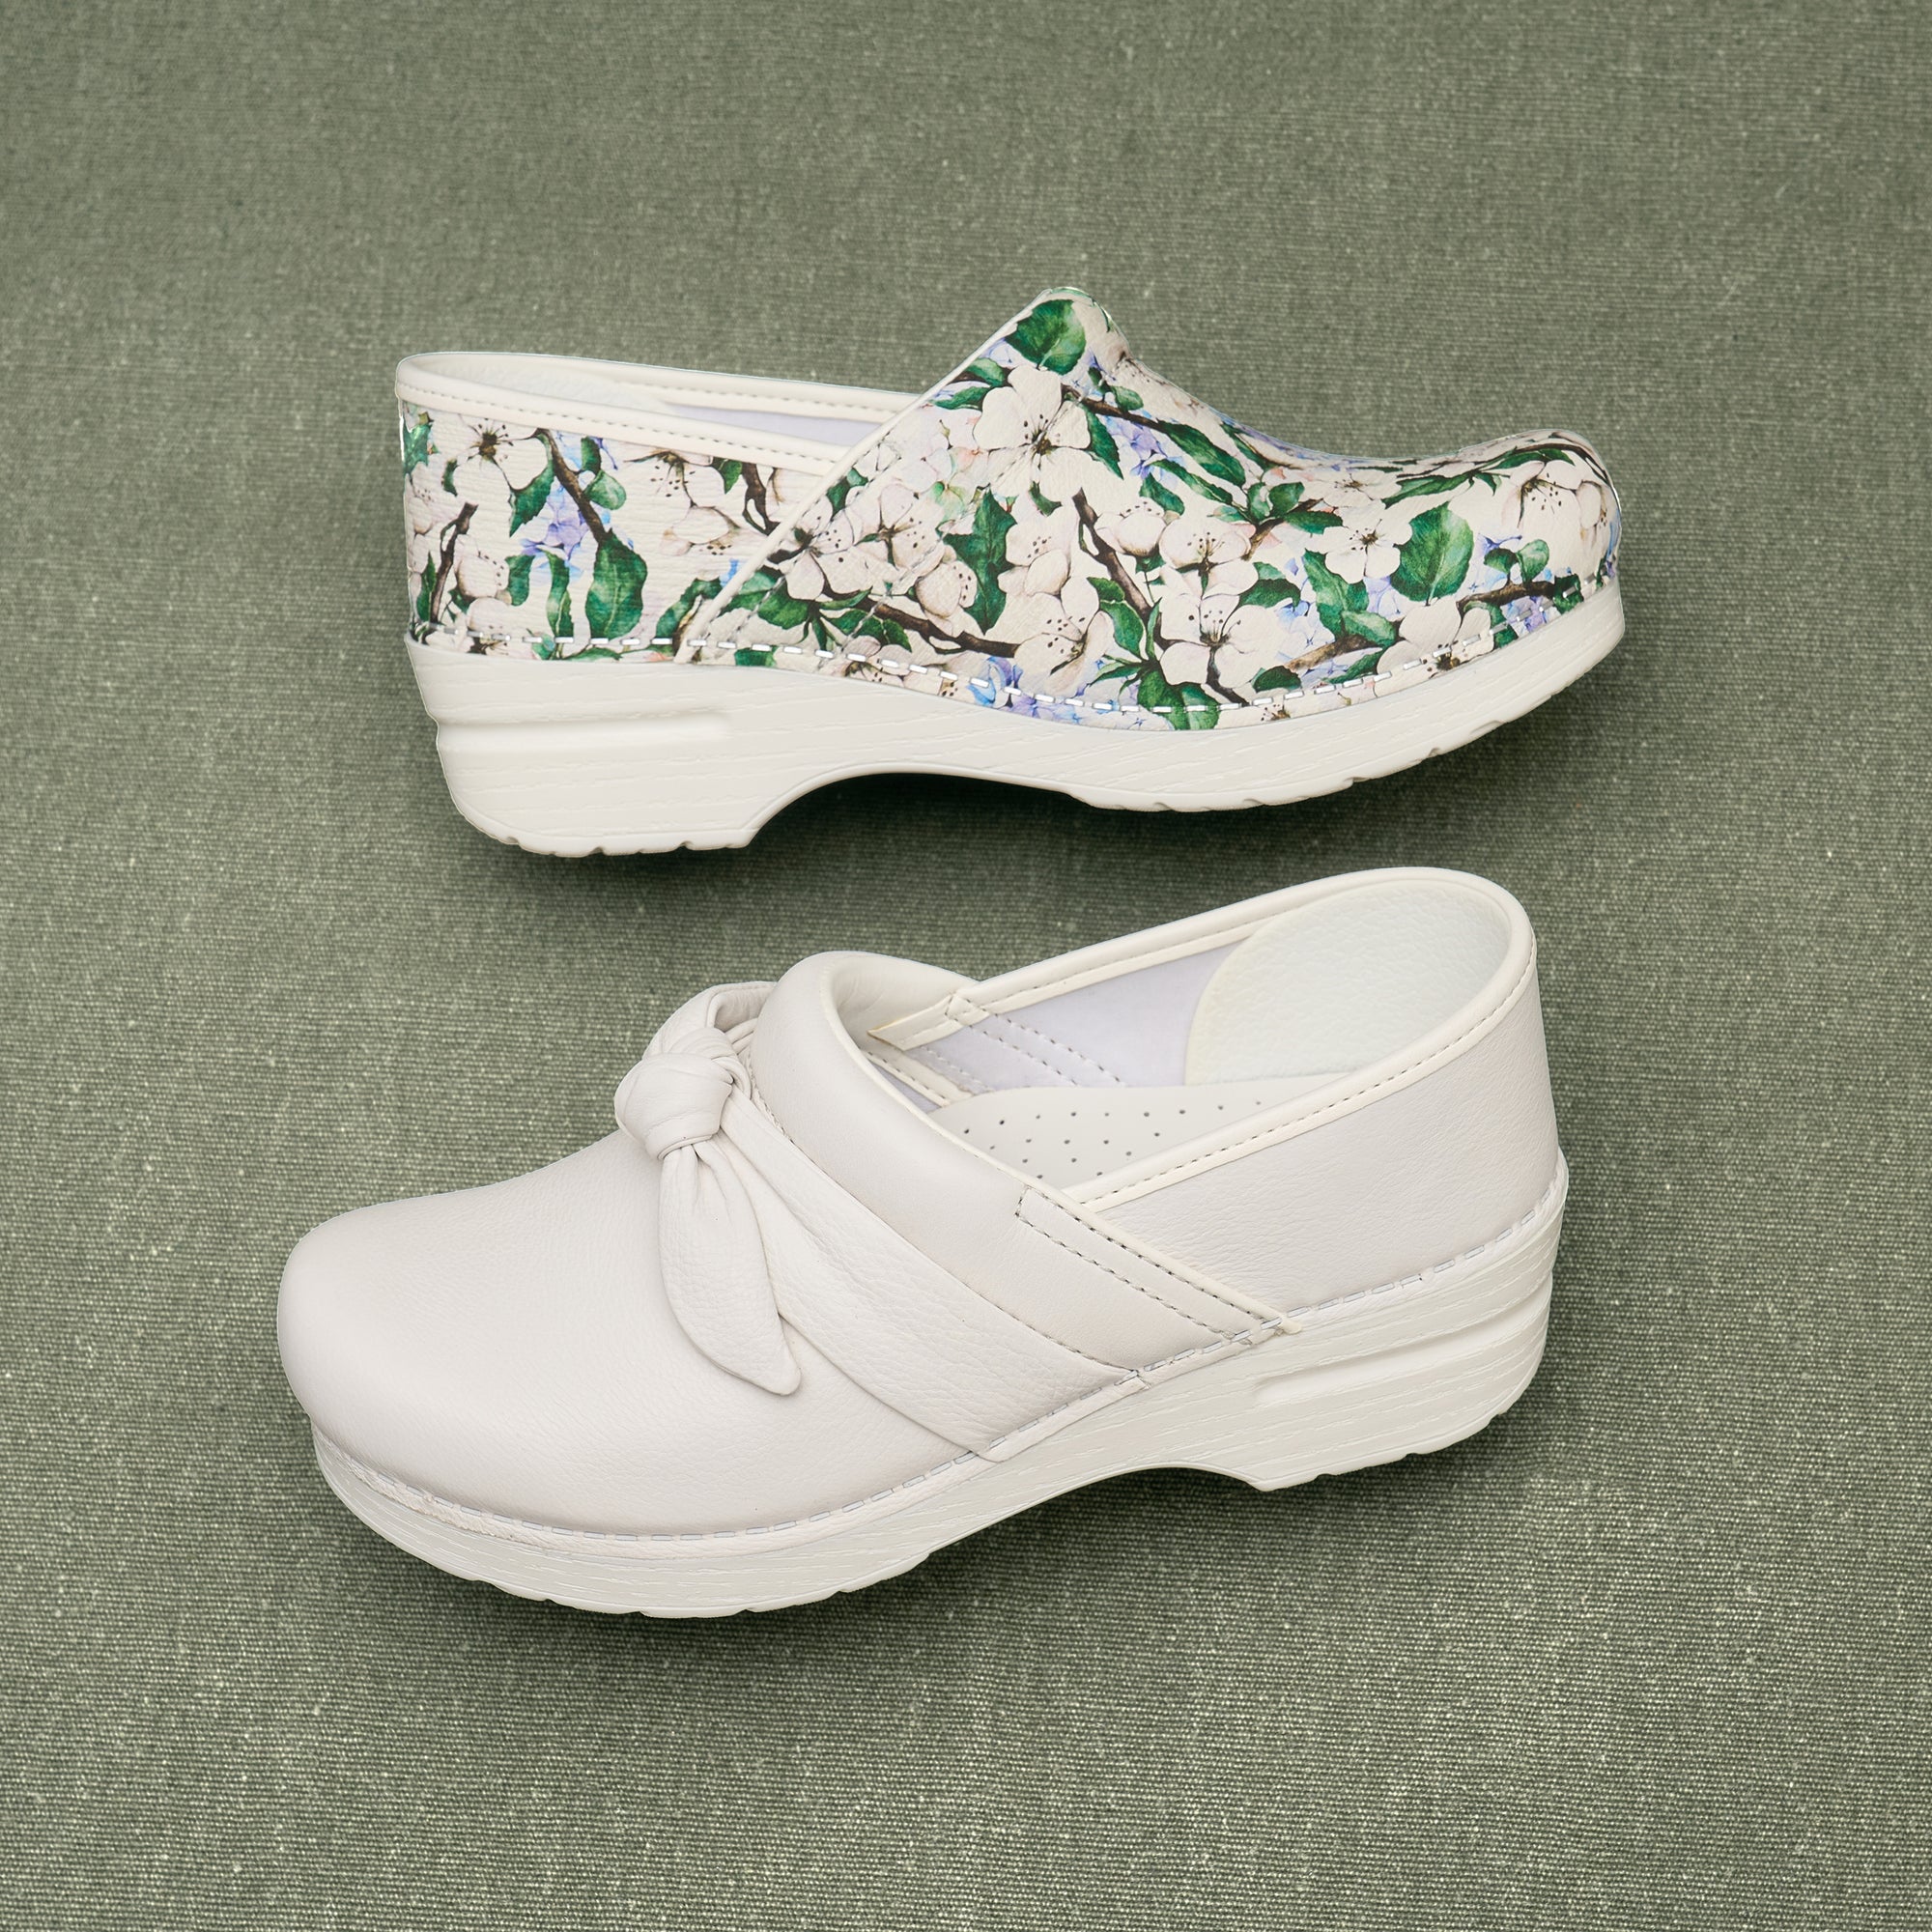 Two white-based exclusive clog styles.